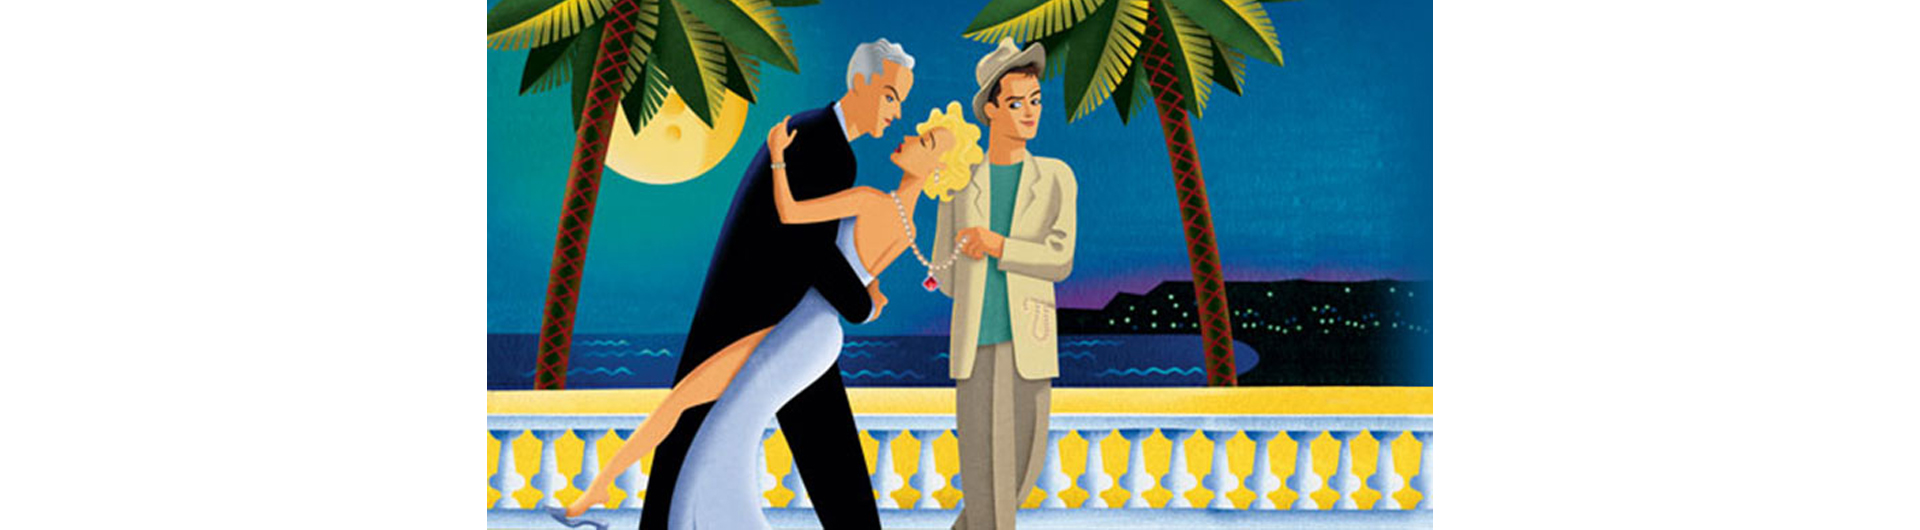 Illustration of a dancing couple and a thief with palm trees and a full moon behind